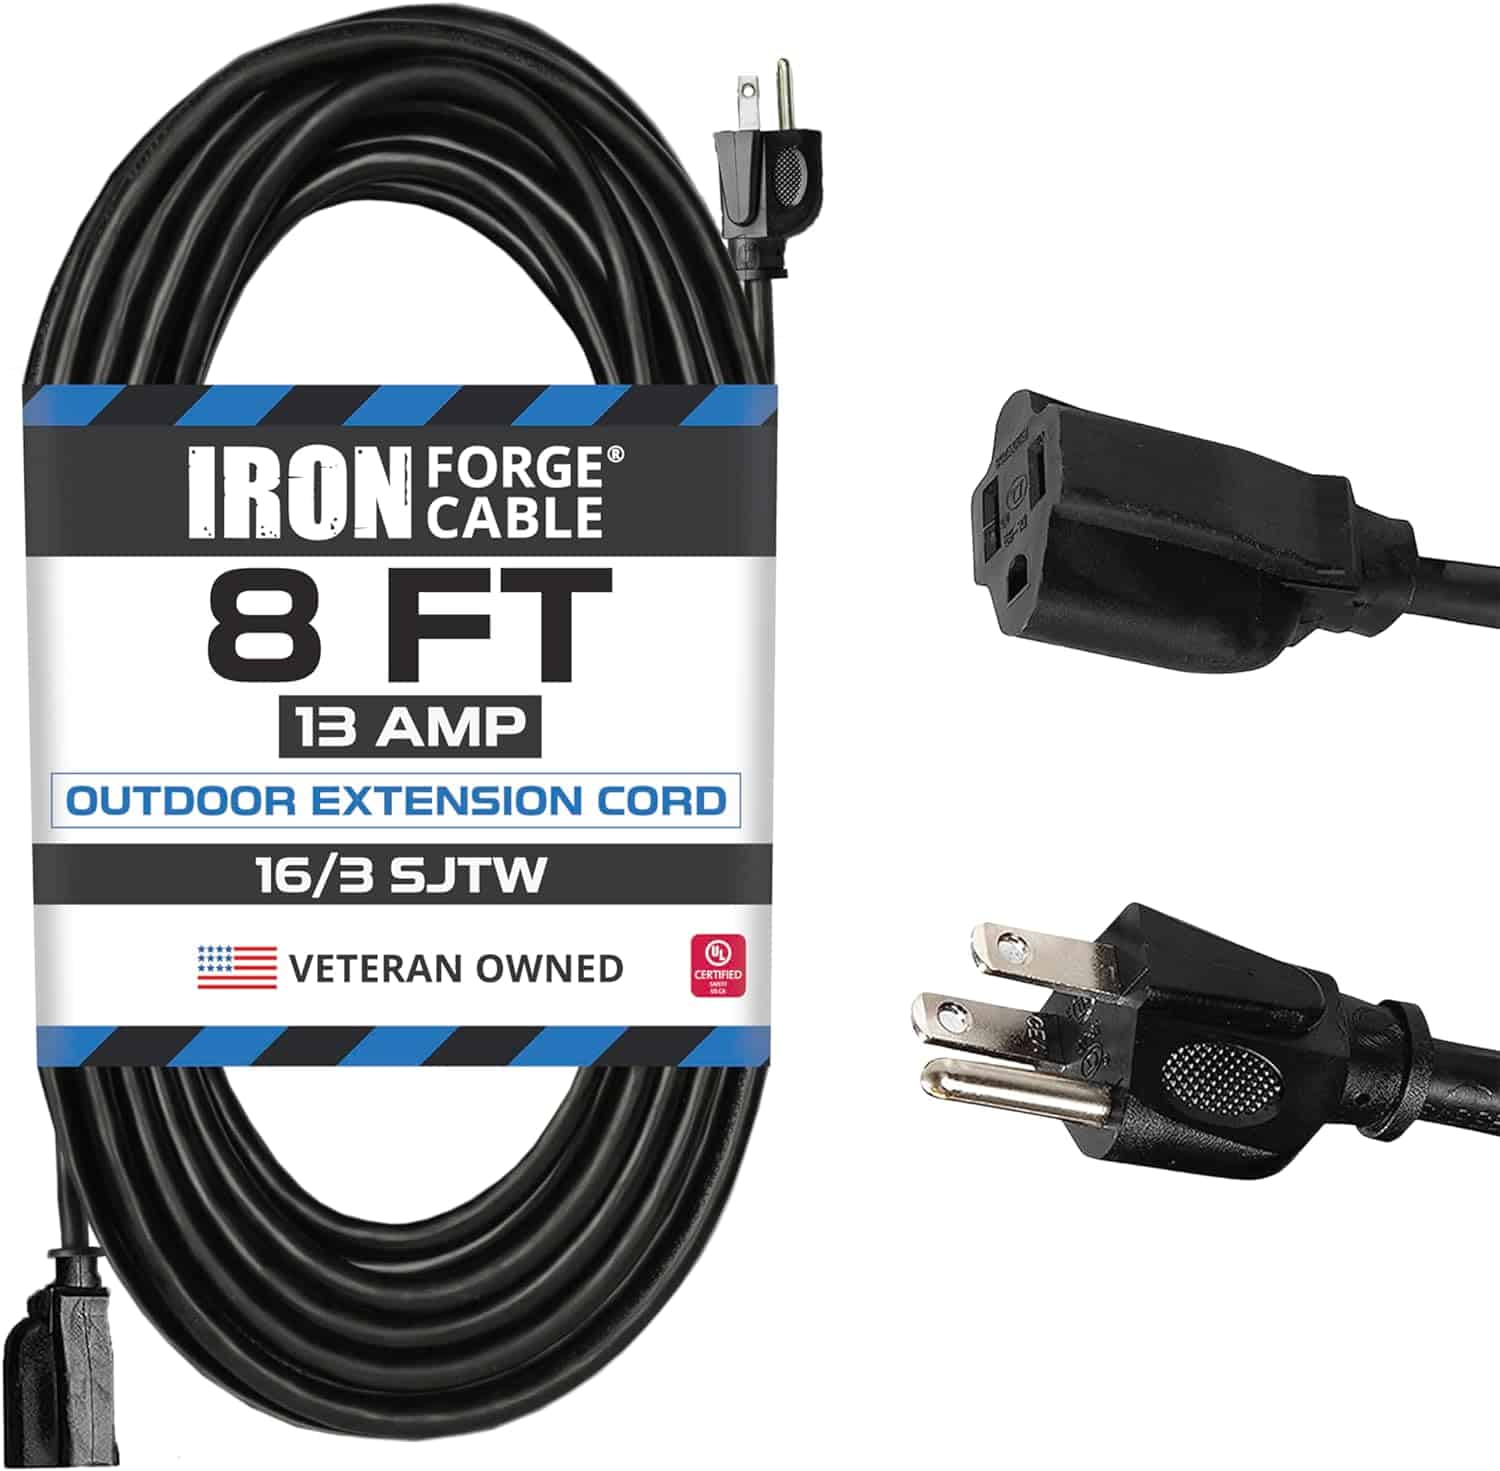 Iron Forge 8 Ft Extension Cord 16 3 Black 8 Foot Extension Cord Indoor Outdoor Use 3 Prong Weatherproof Exterior Extension Cord Great for Gardens 1